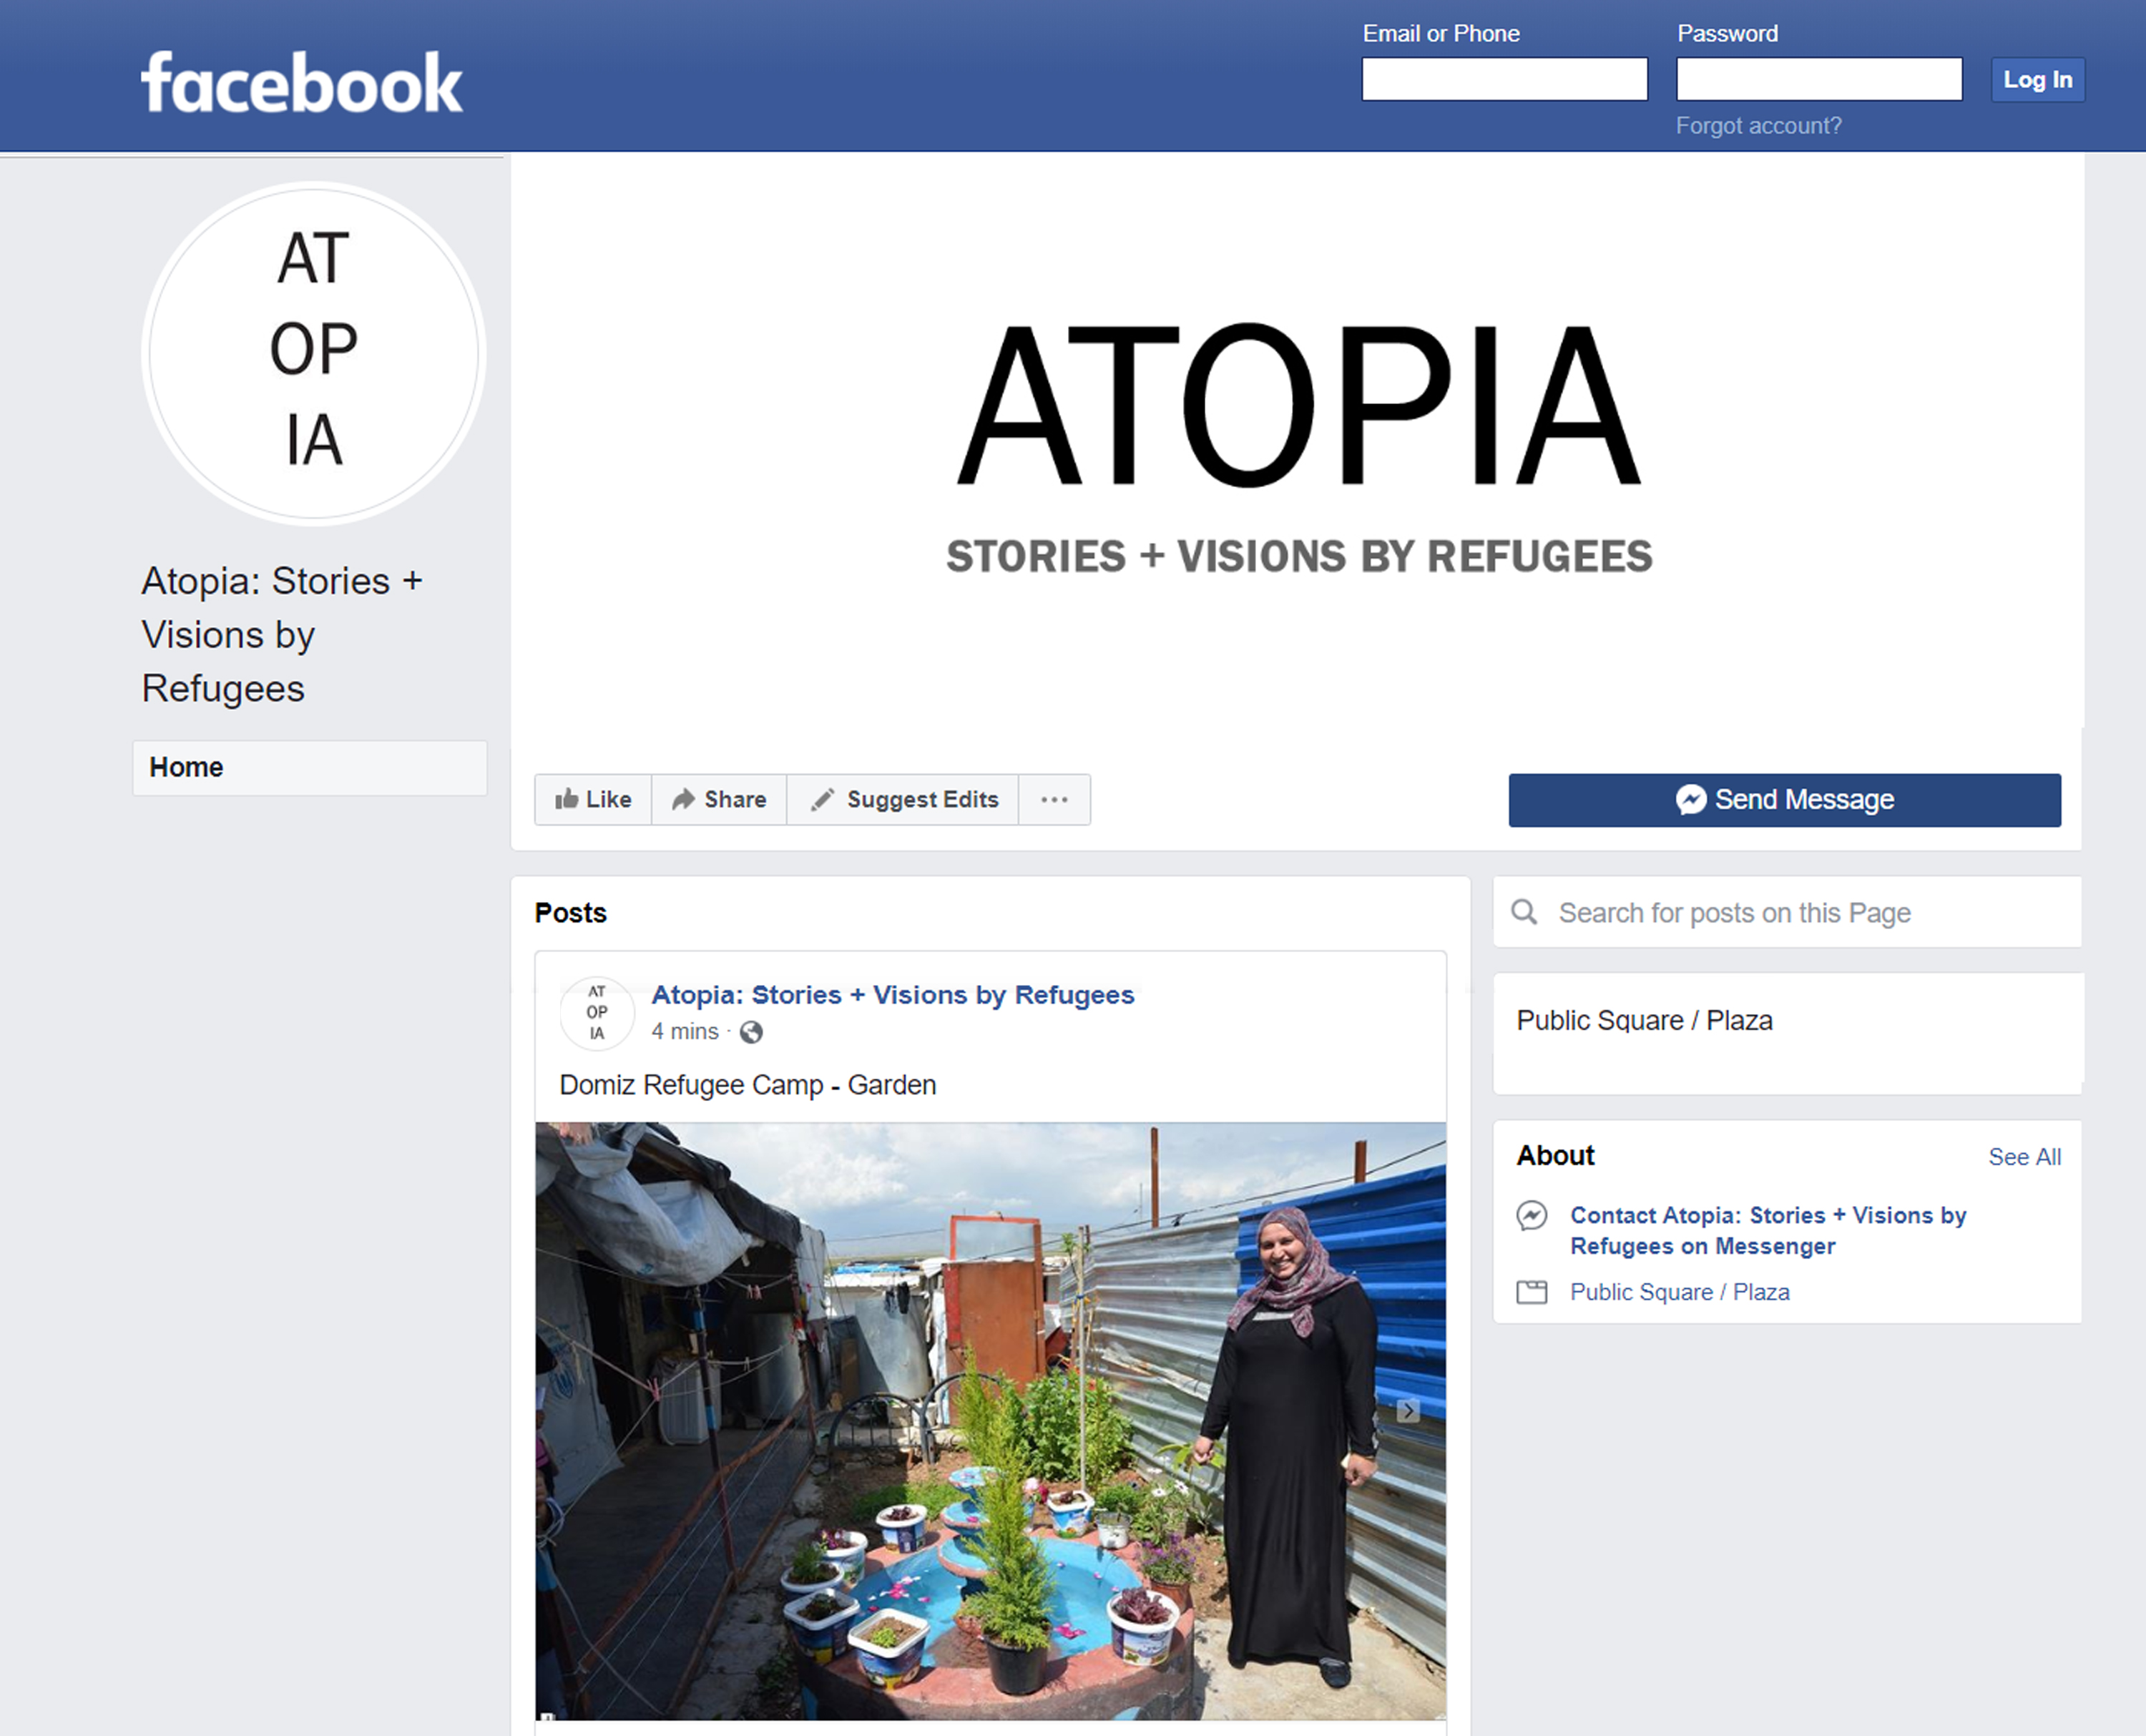 ATOPIA: STORIES + VISIONS BY REFUGEES (AVIVA RUBIN AND STEPHEN FAN)